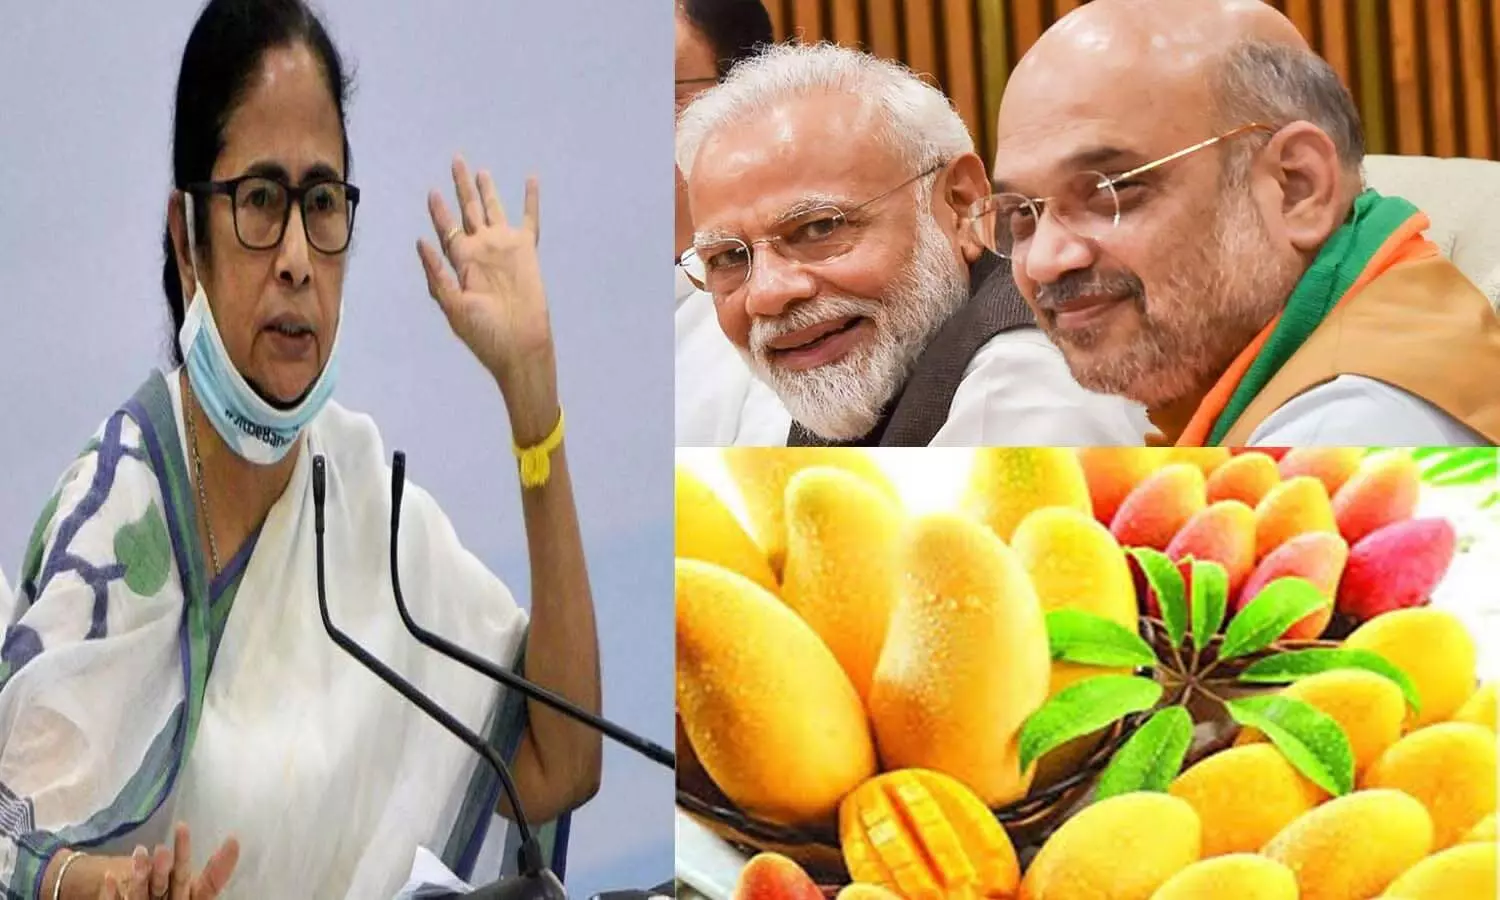 Chief Minister Mamata Banerjee has sent a gift of sweet mangoes to Prime Minister Narendra Modi and Union Home Minister Amit Shah.